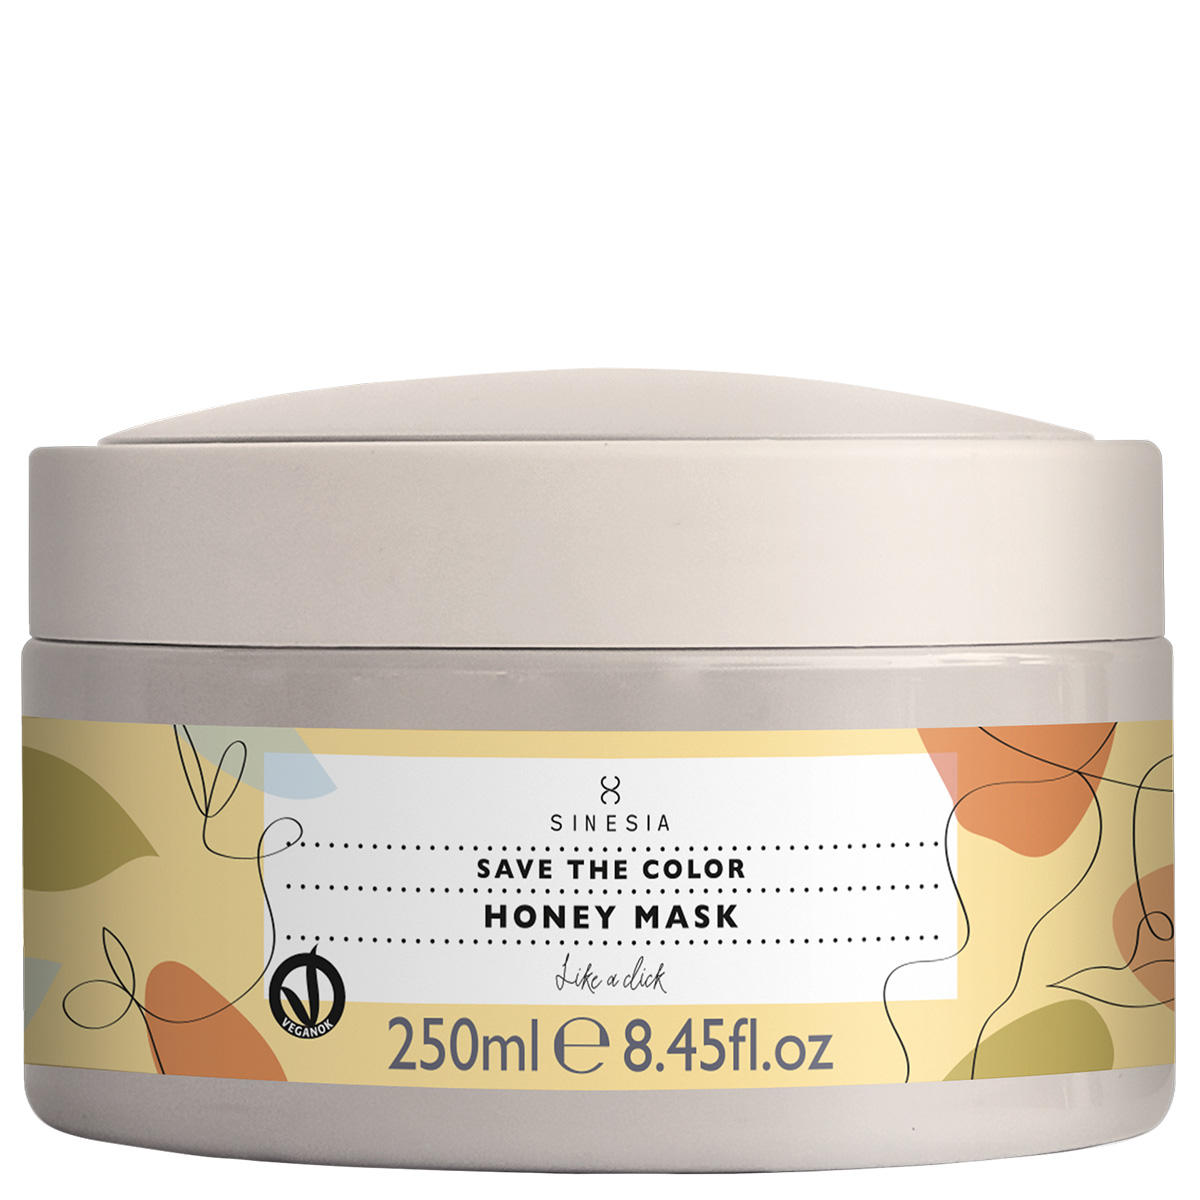 SINESIA Save the Color Honey Mask 250 ml - 1